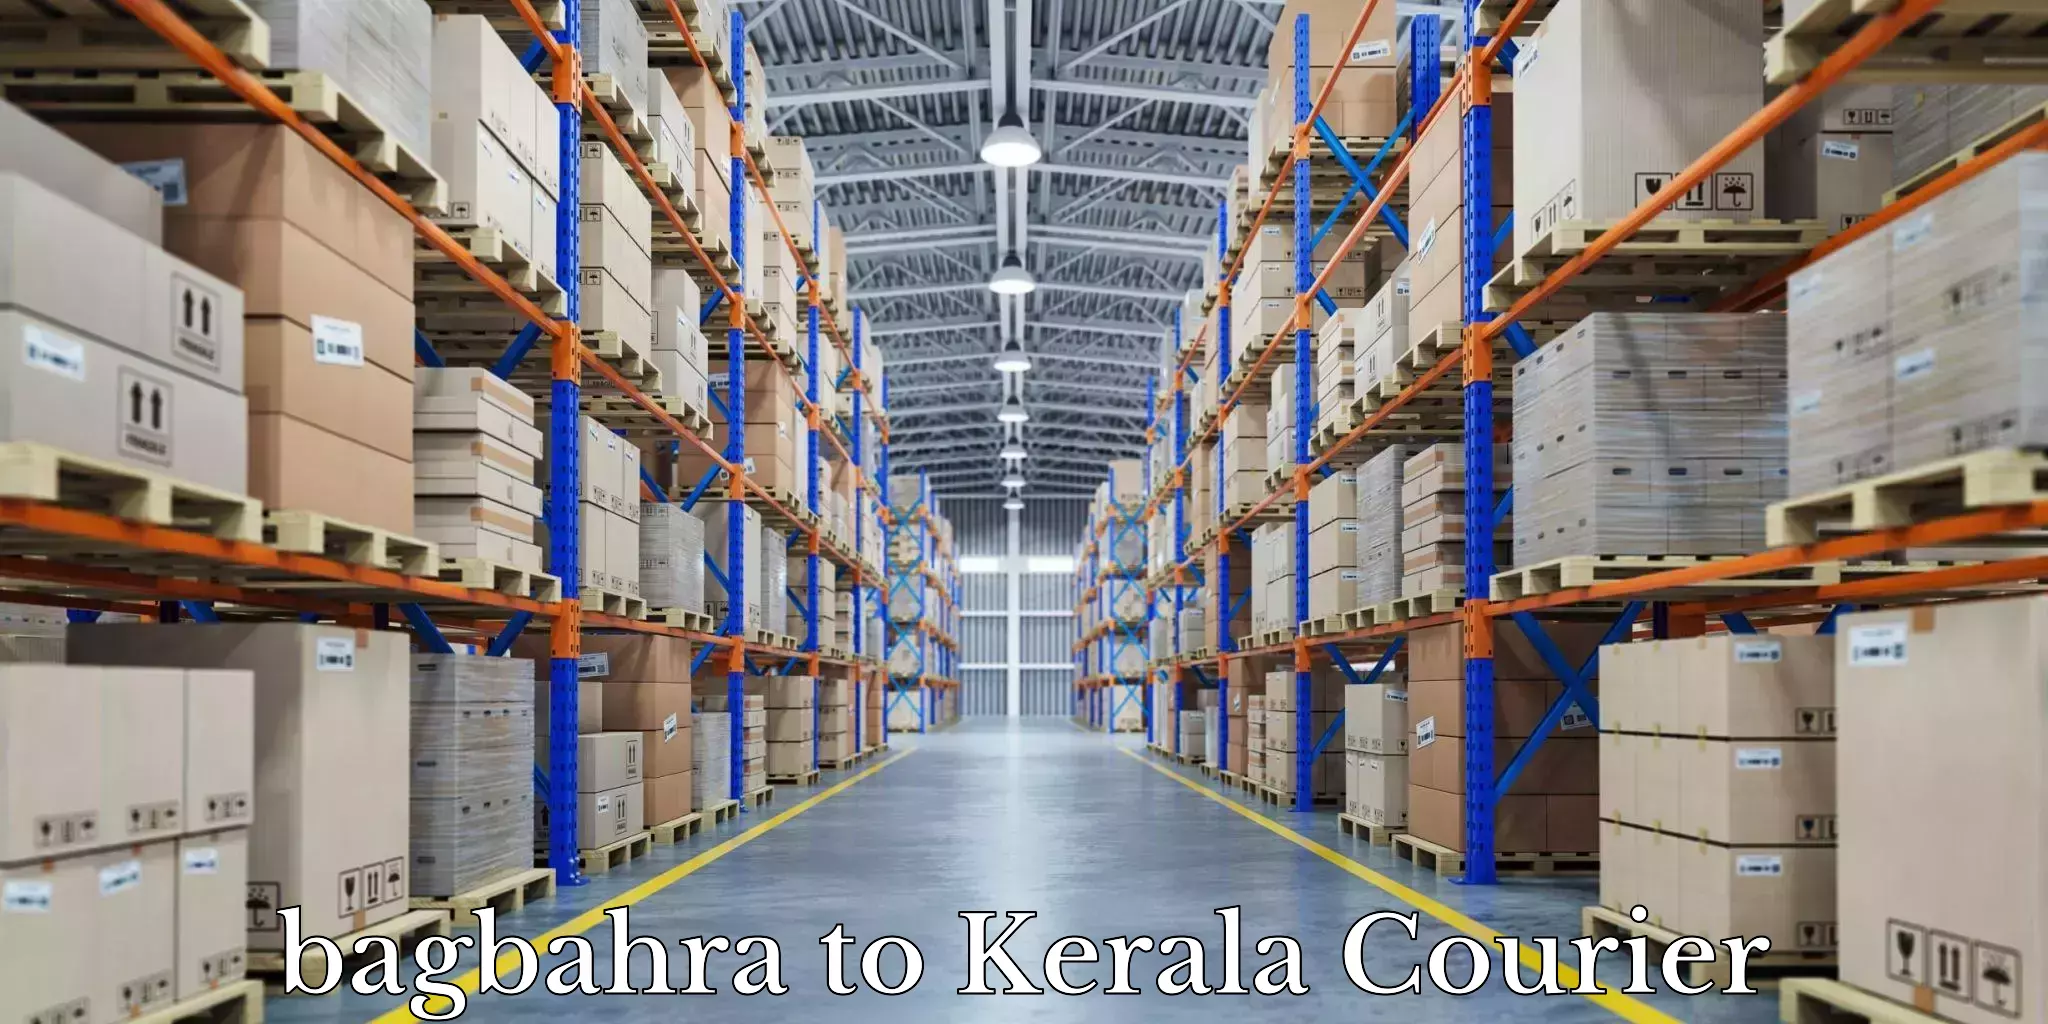 Efficient moving company bagbahra to Rajamudy